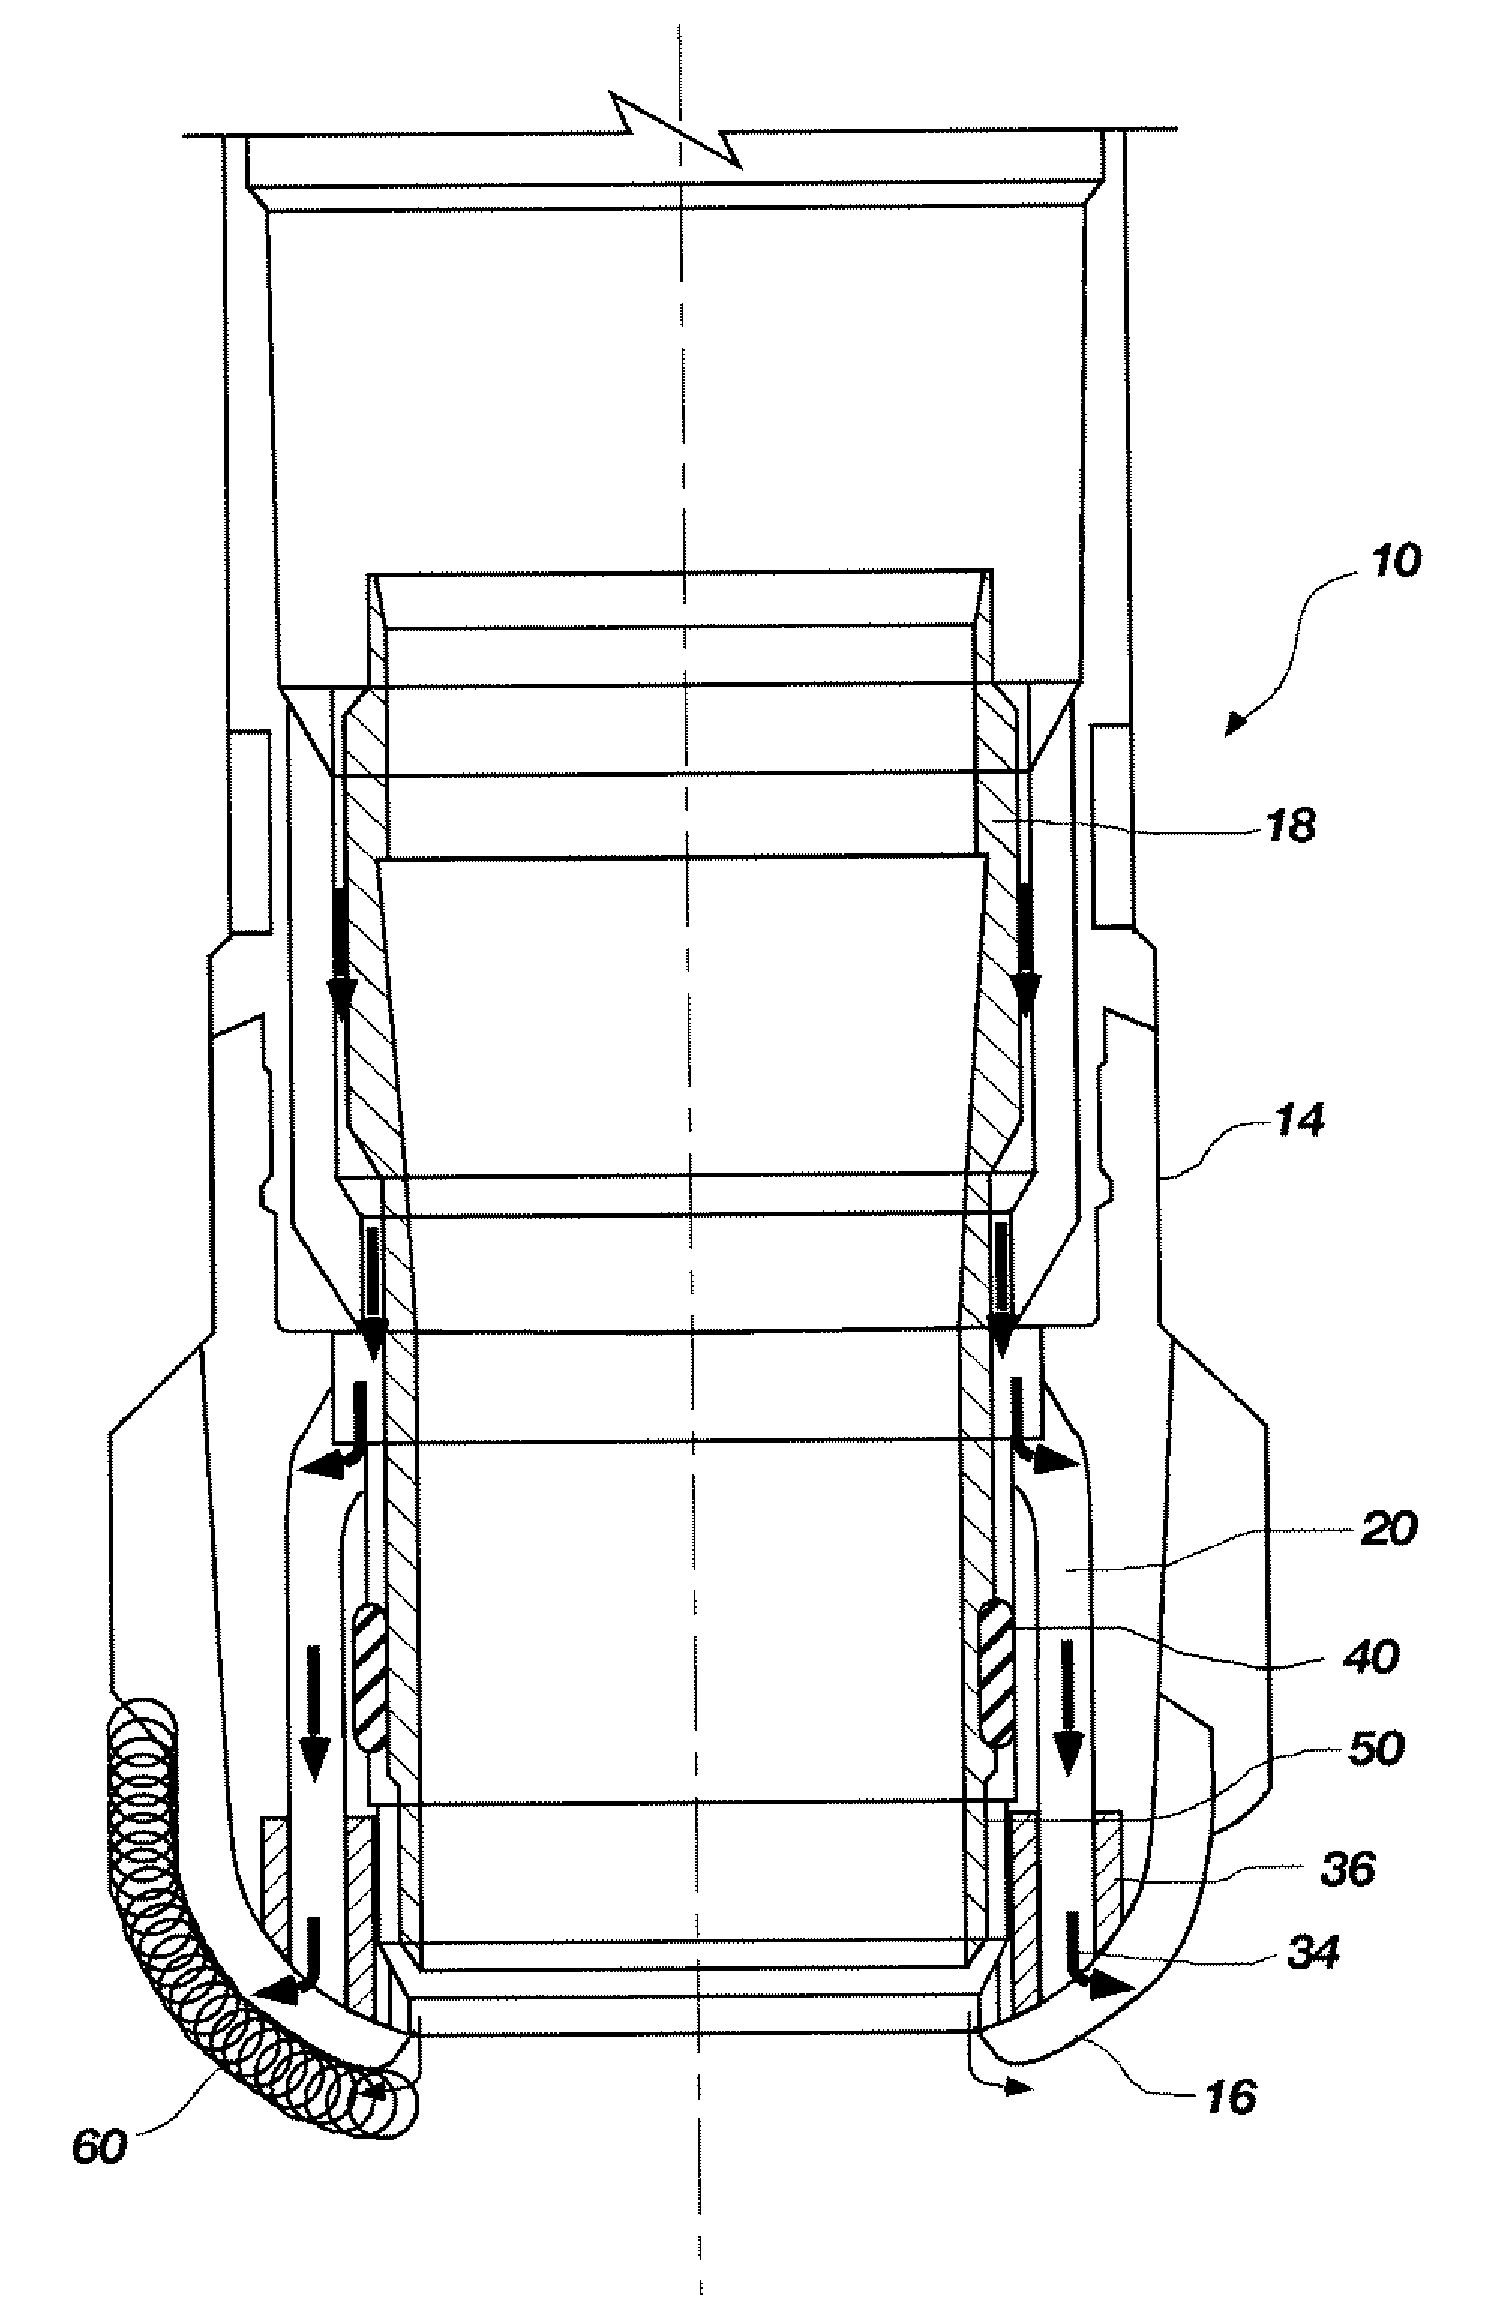 Core drill assembly with adjustable total flow area and restricted flow between outer and inner barrel assemblies